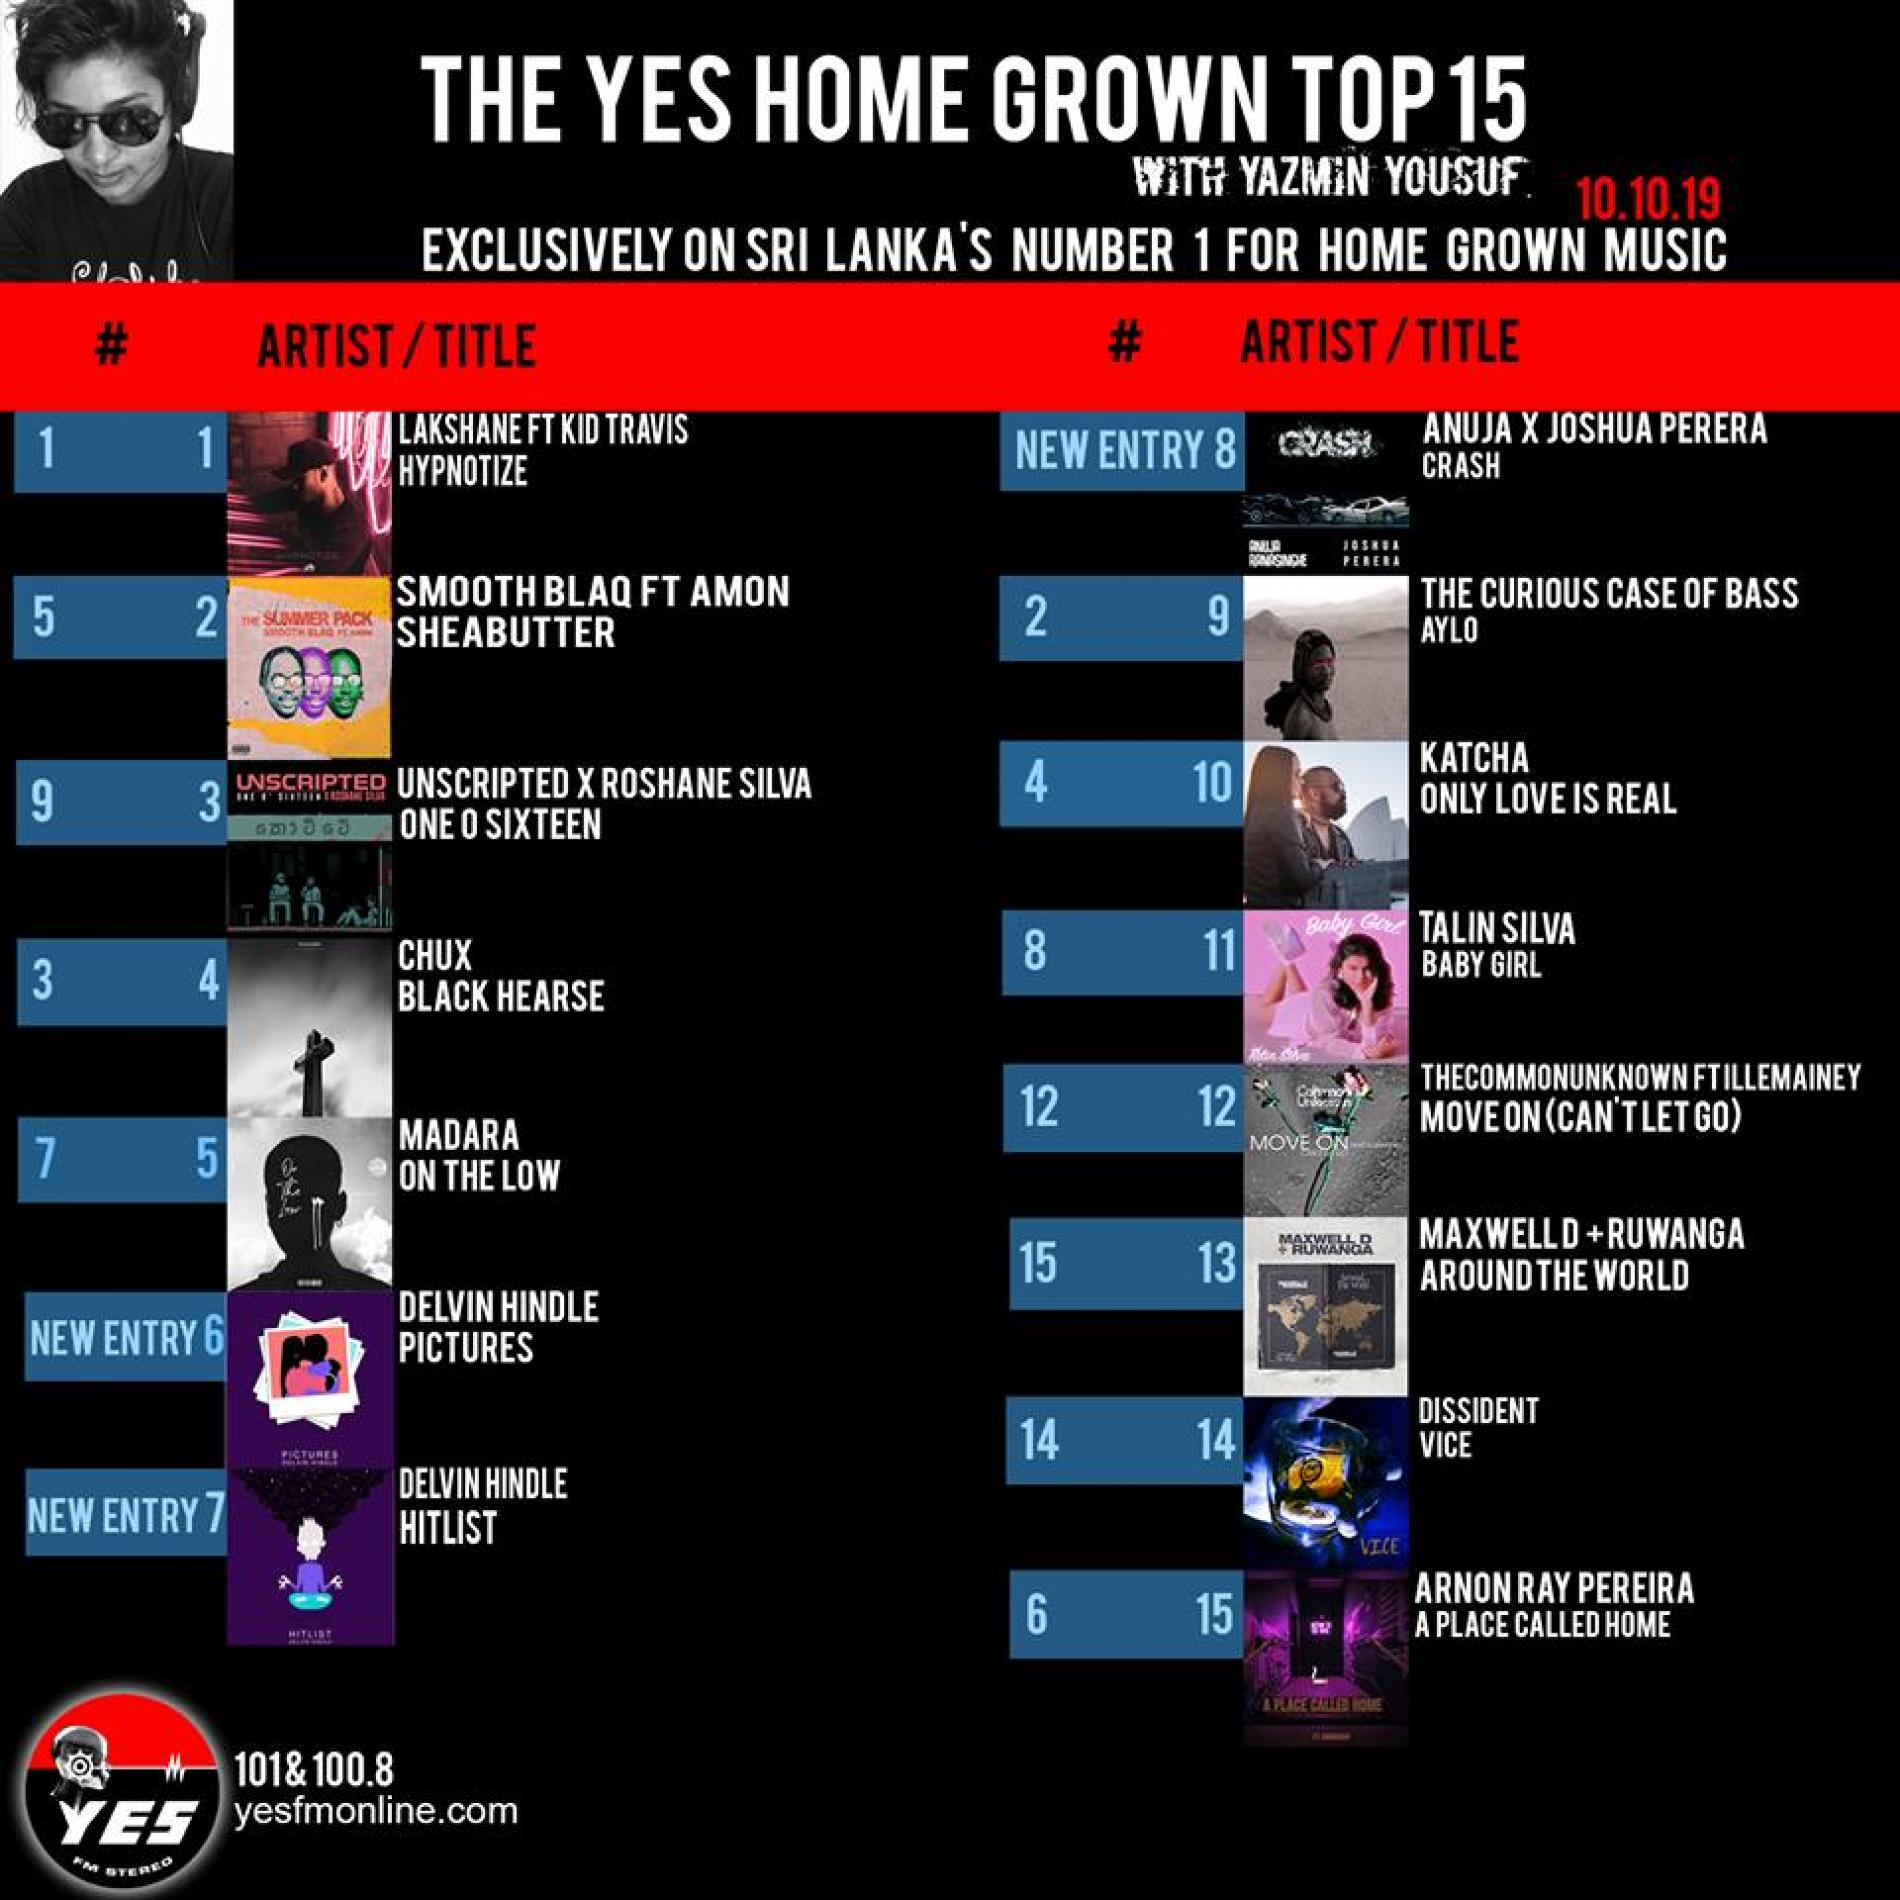 Lakshane & Kid Travis Stay At Number 1 On The YES Home Grown Top 15!